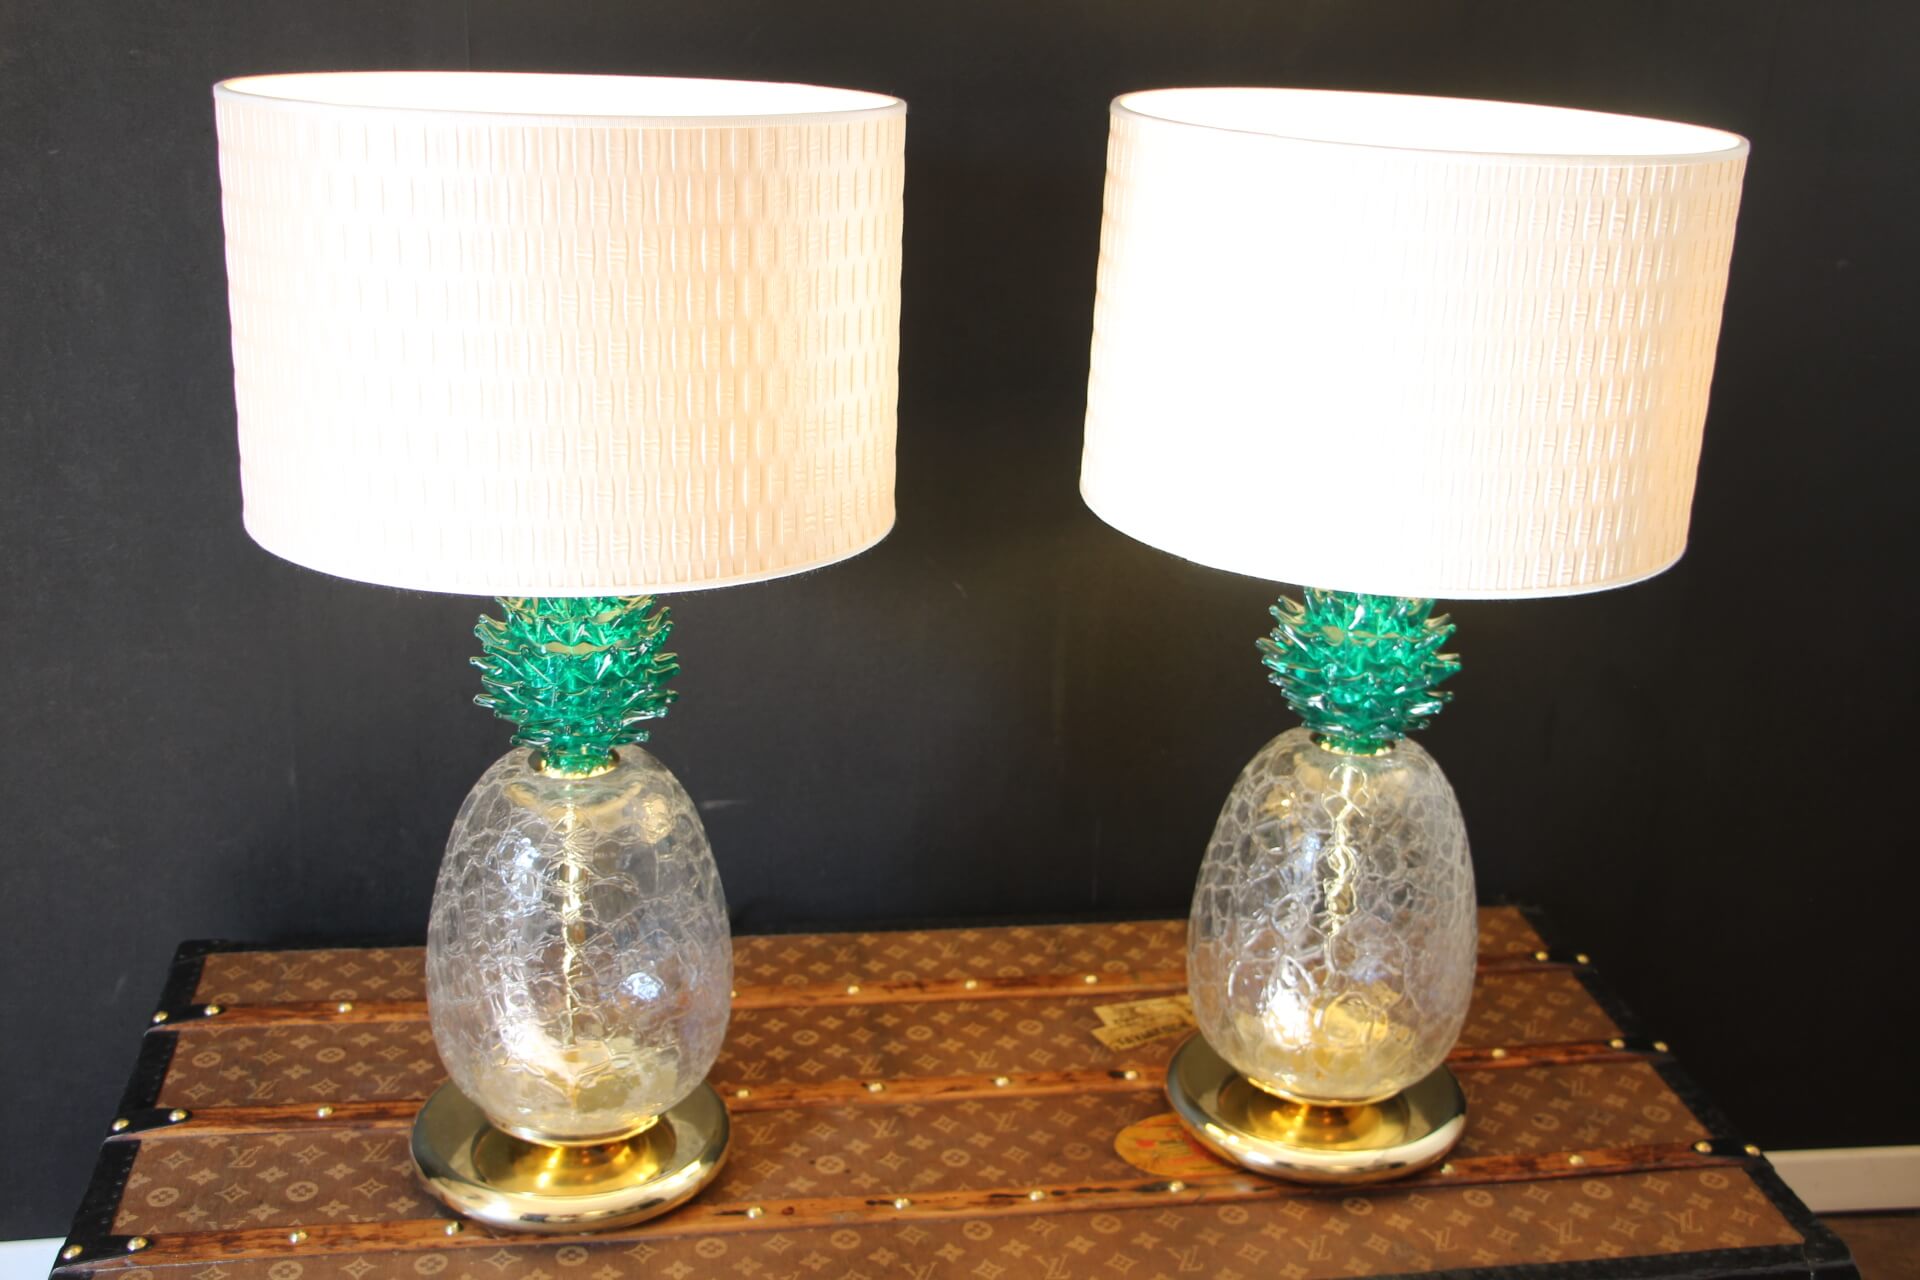 Large Pair Of Pineapple Table Lamps in Emerald Green Murano Glass